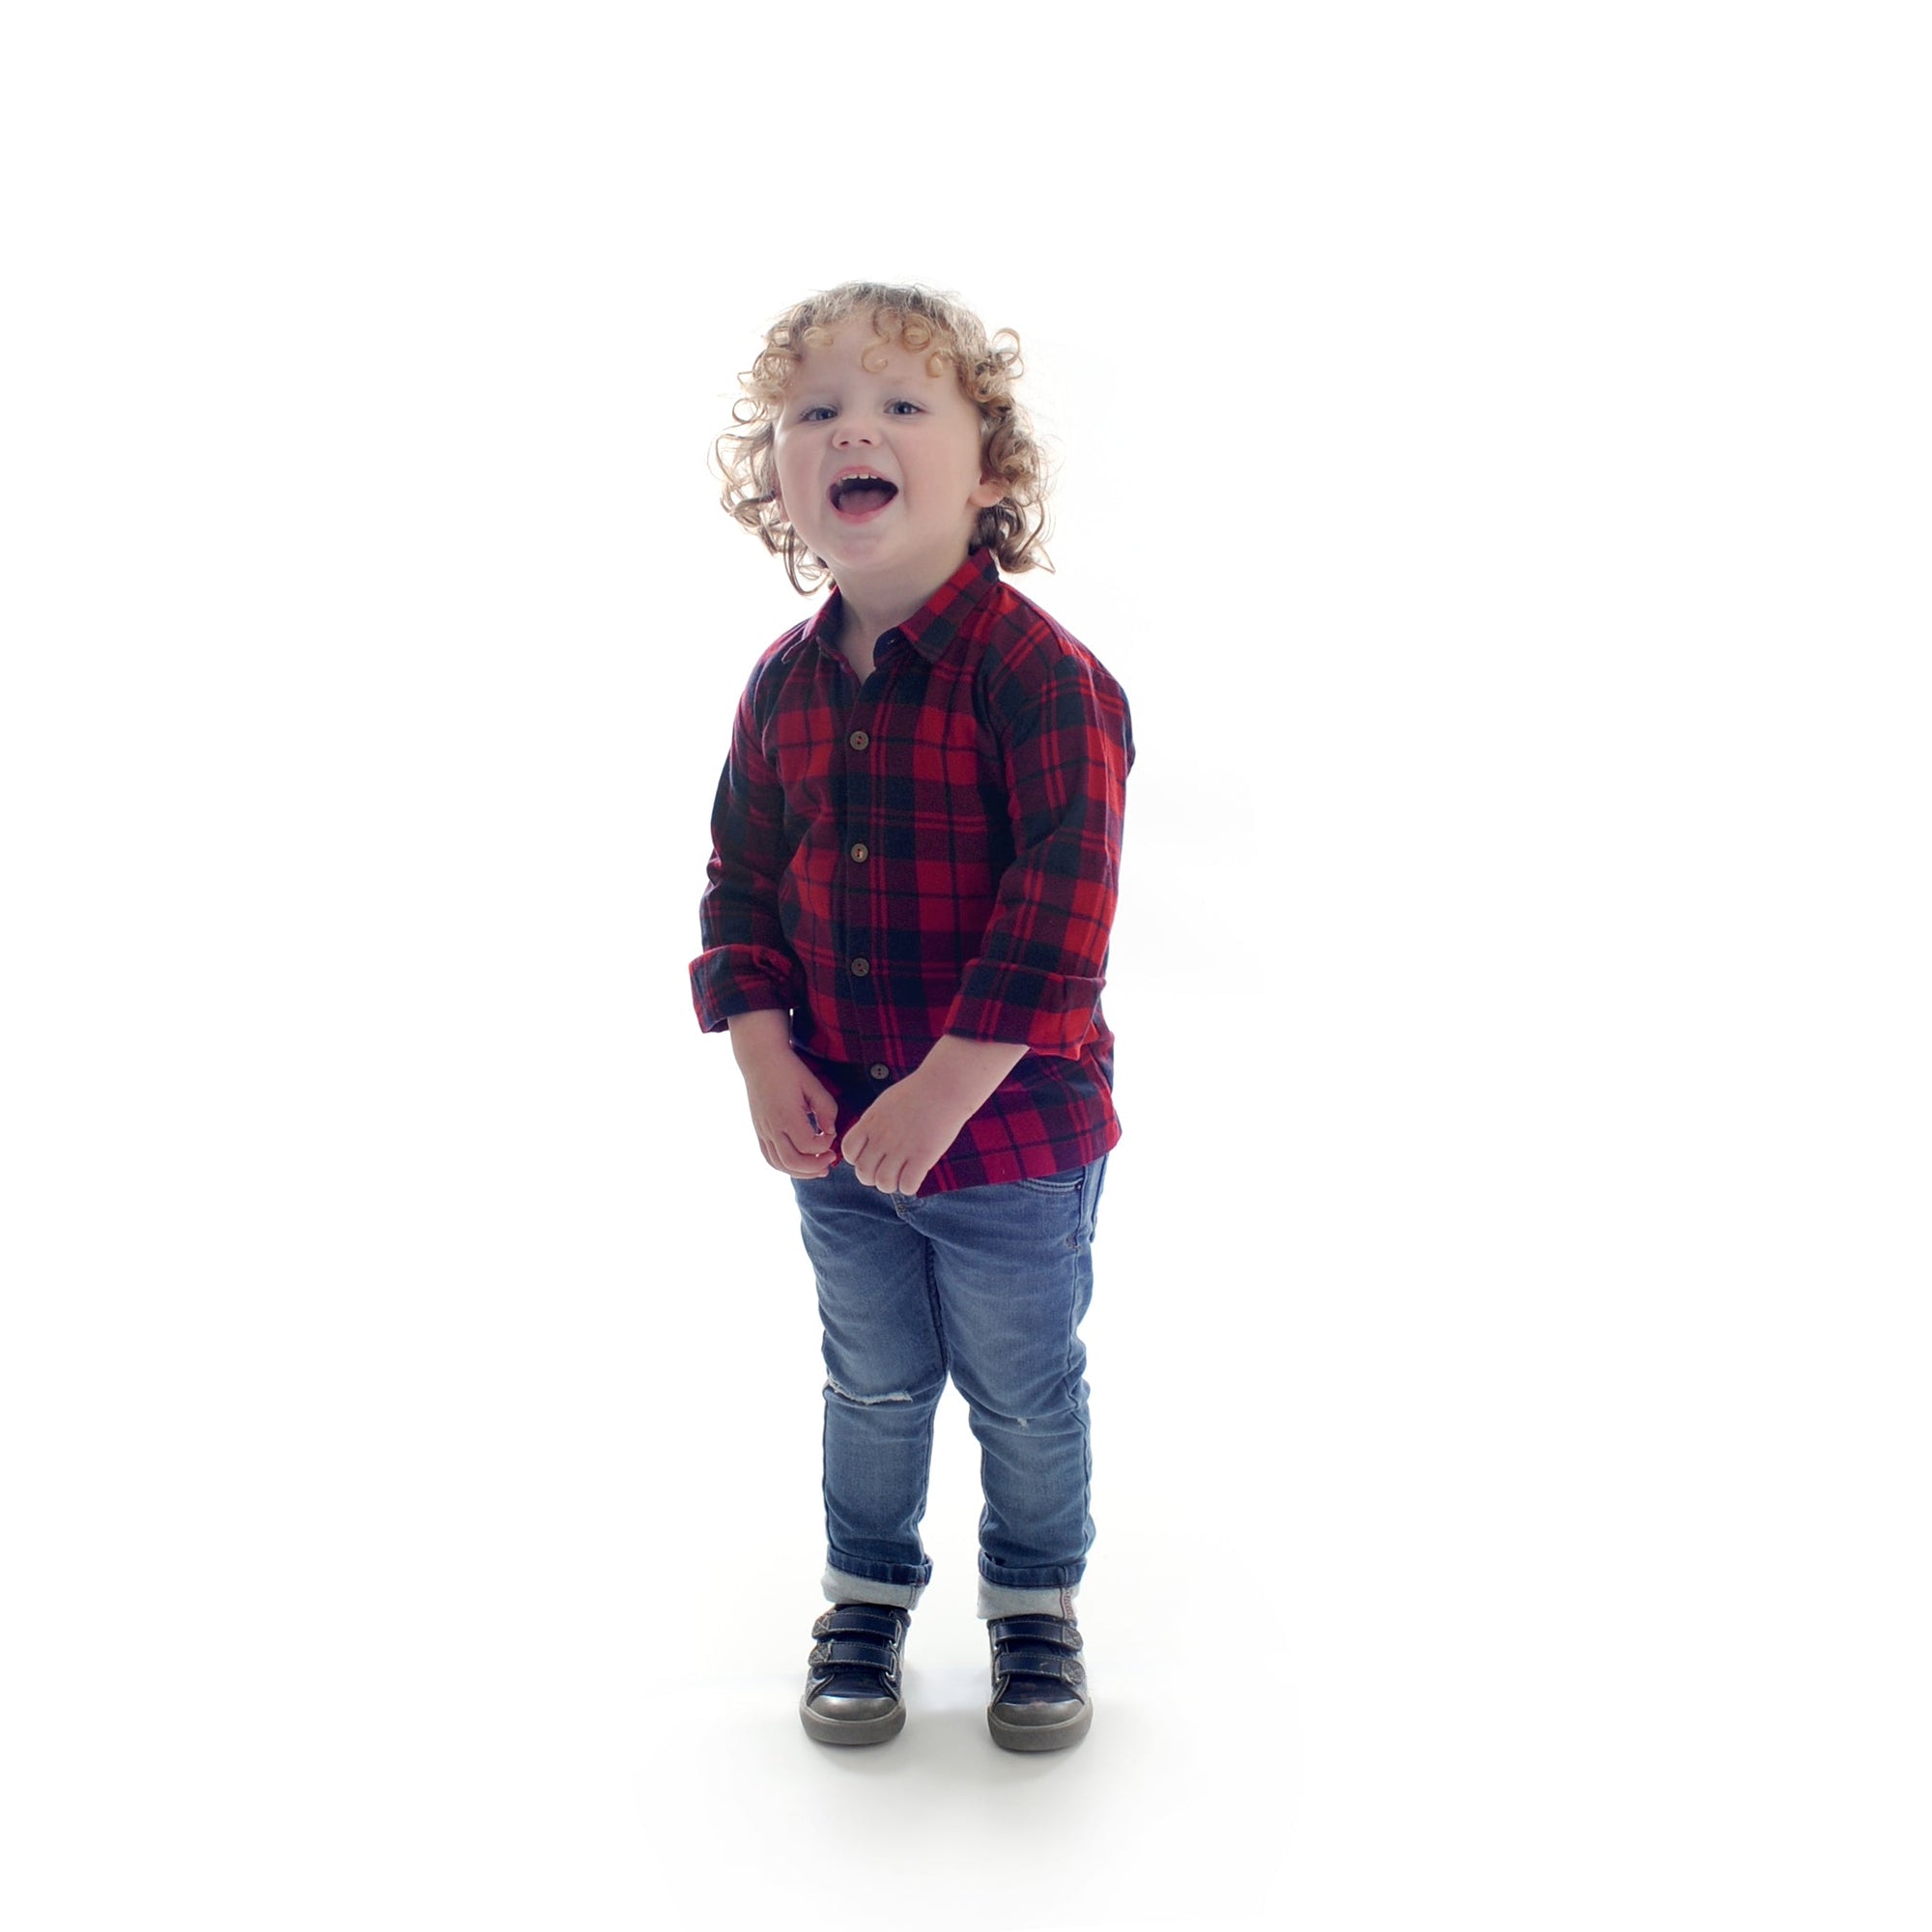 100% Cotton Boys Plaid Shirt with Wooden Buttons